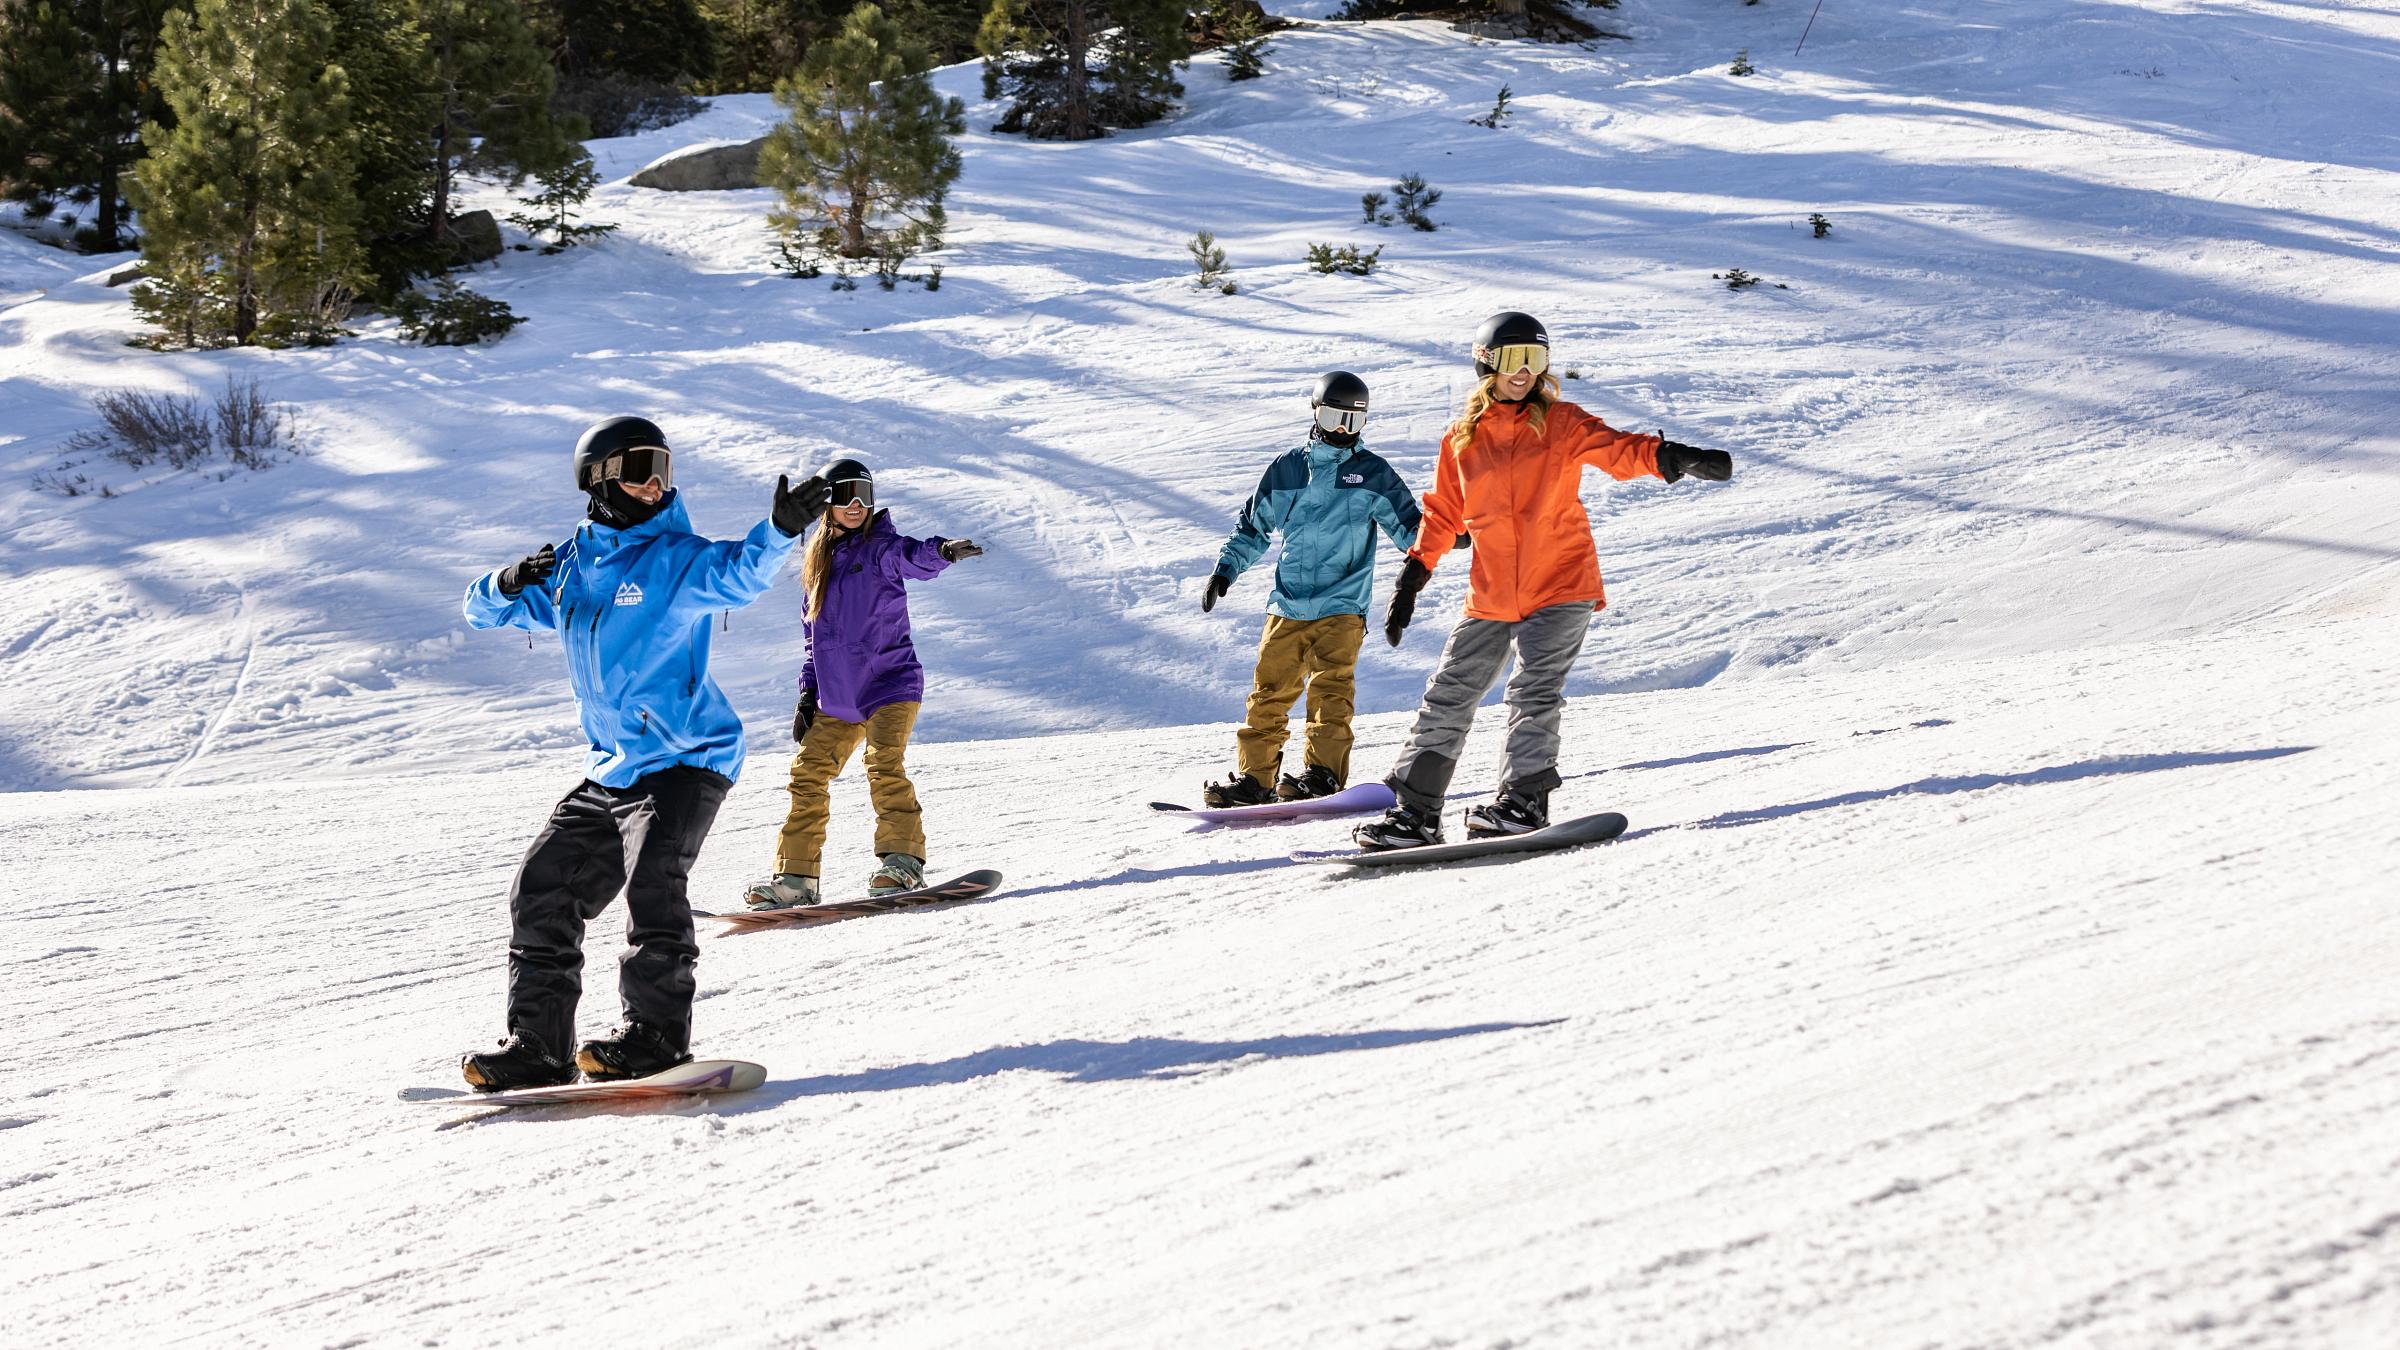 Three snowboarders taking a snowboard lesson